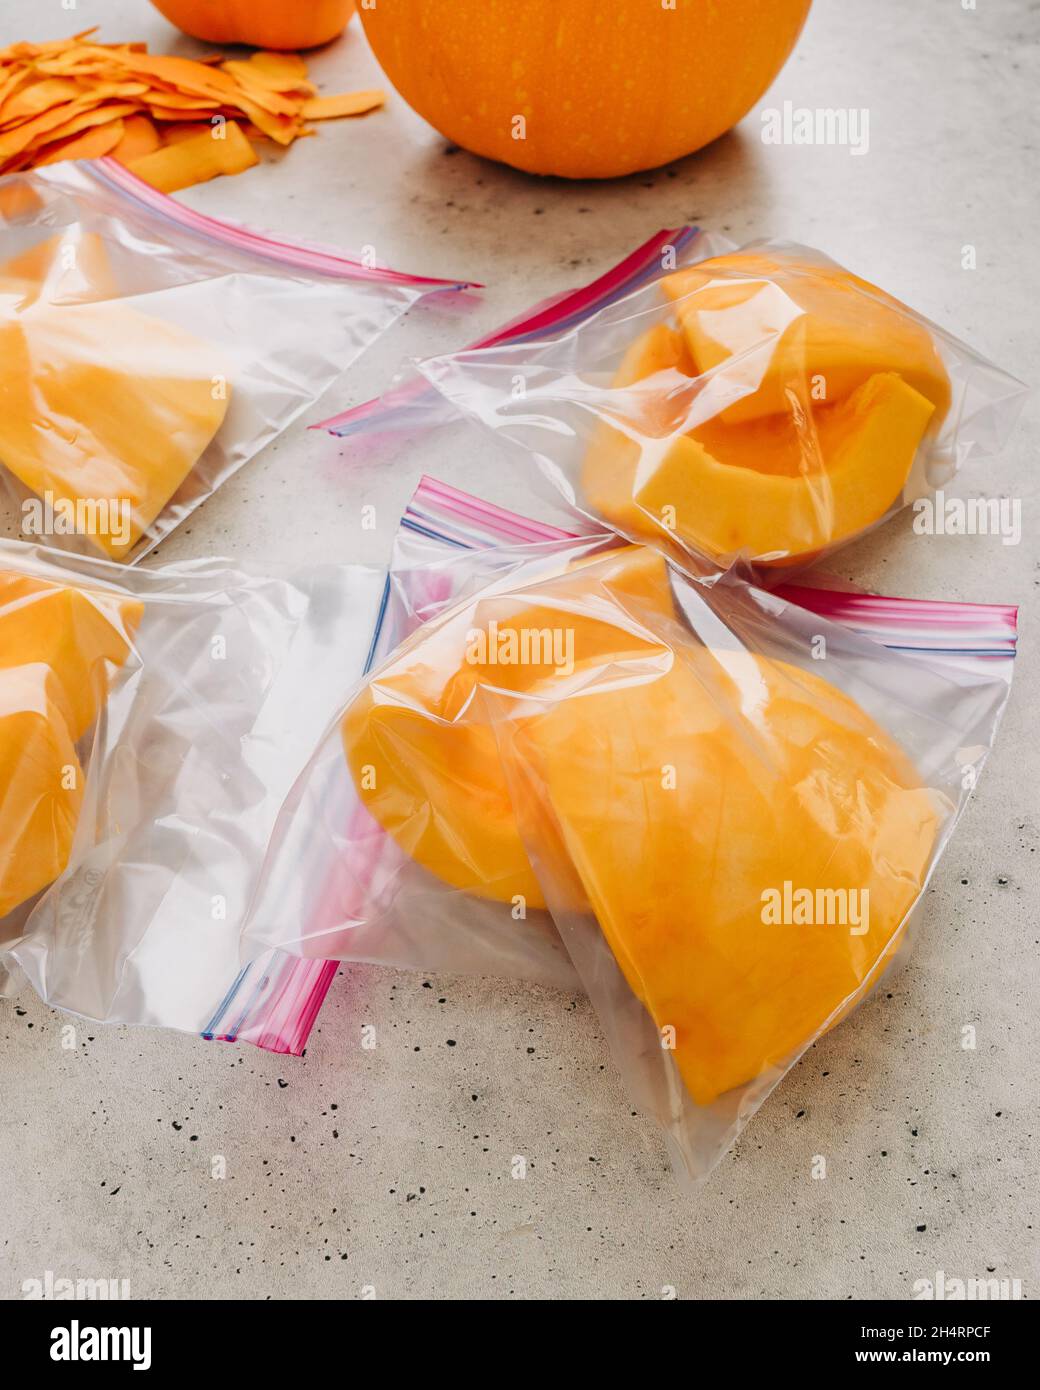 https://c8.alamy.com/comp/2H4RPCF/fresh-raw-peeled-pumpkin-slices-in-zip-lock-bags-close-up-ready-to-be-frozen-2H4RPCF.jpg